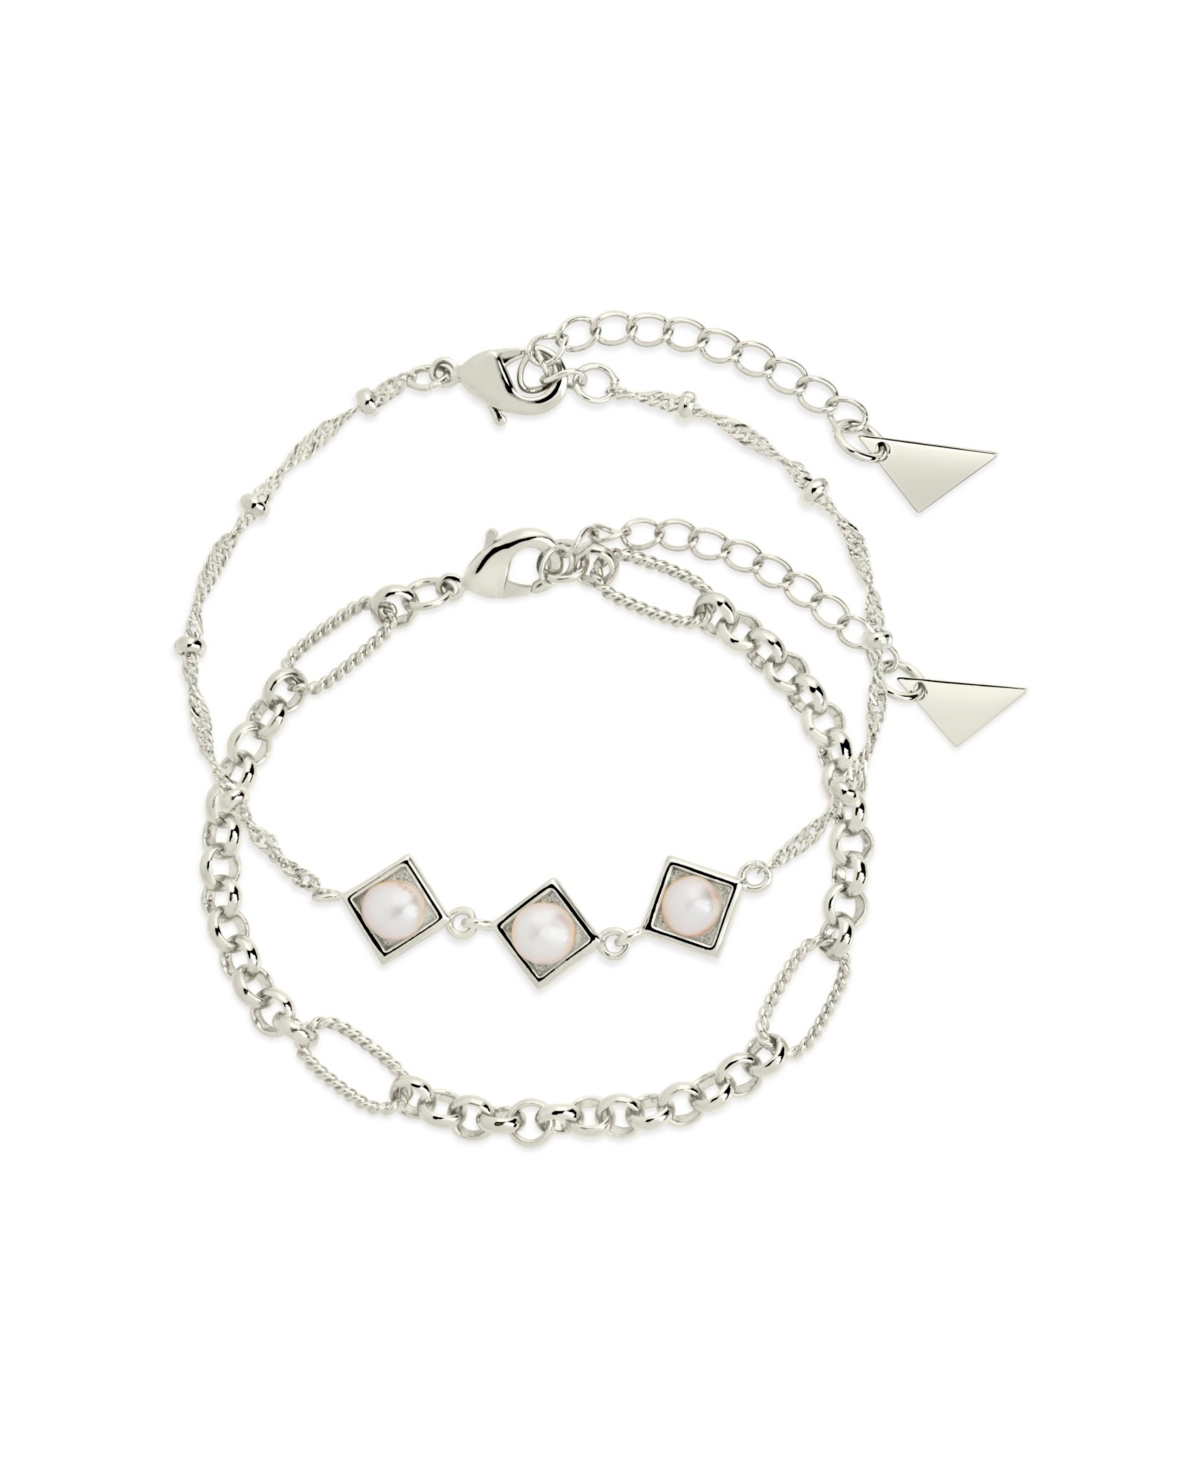 Gold-Tone or Silver-Tone Reine Bracelet Set With Freshwater Pearls - Silver